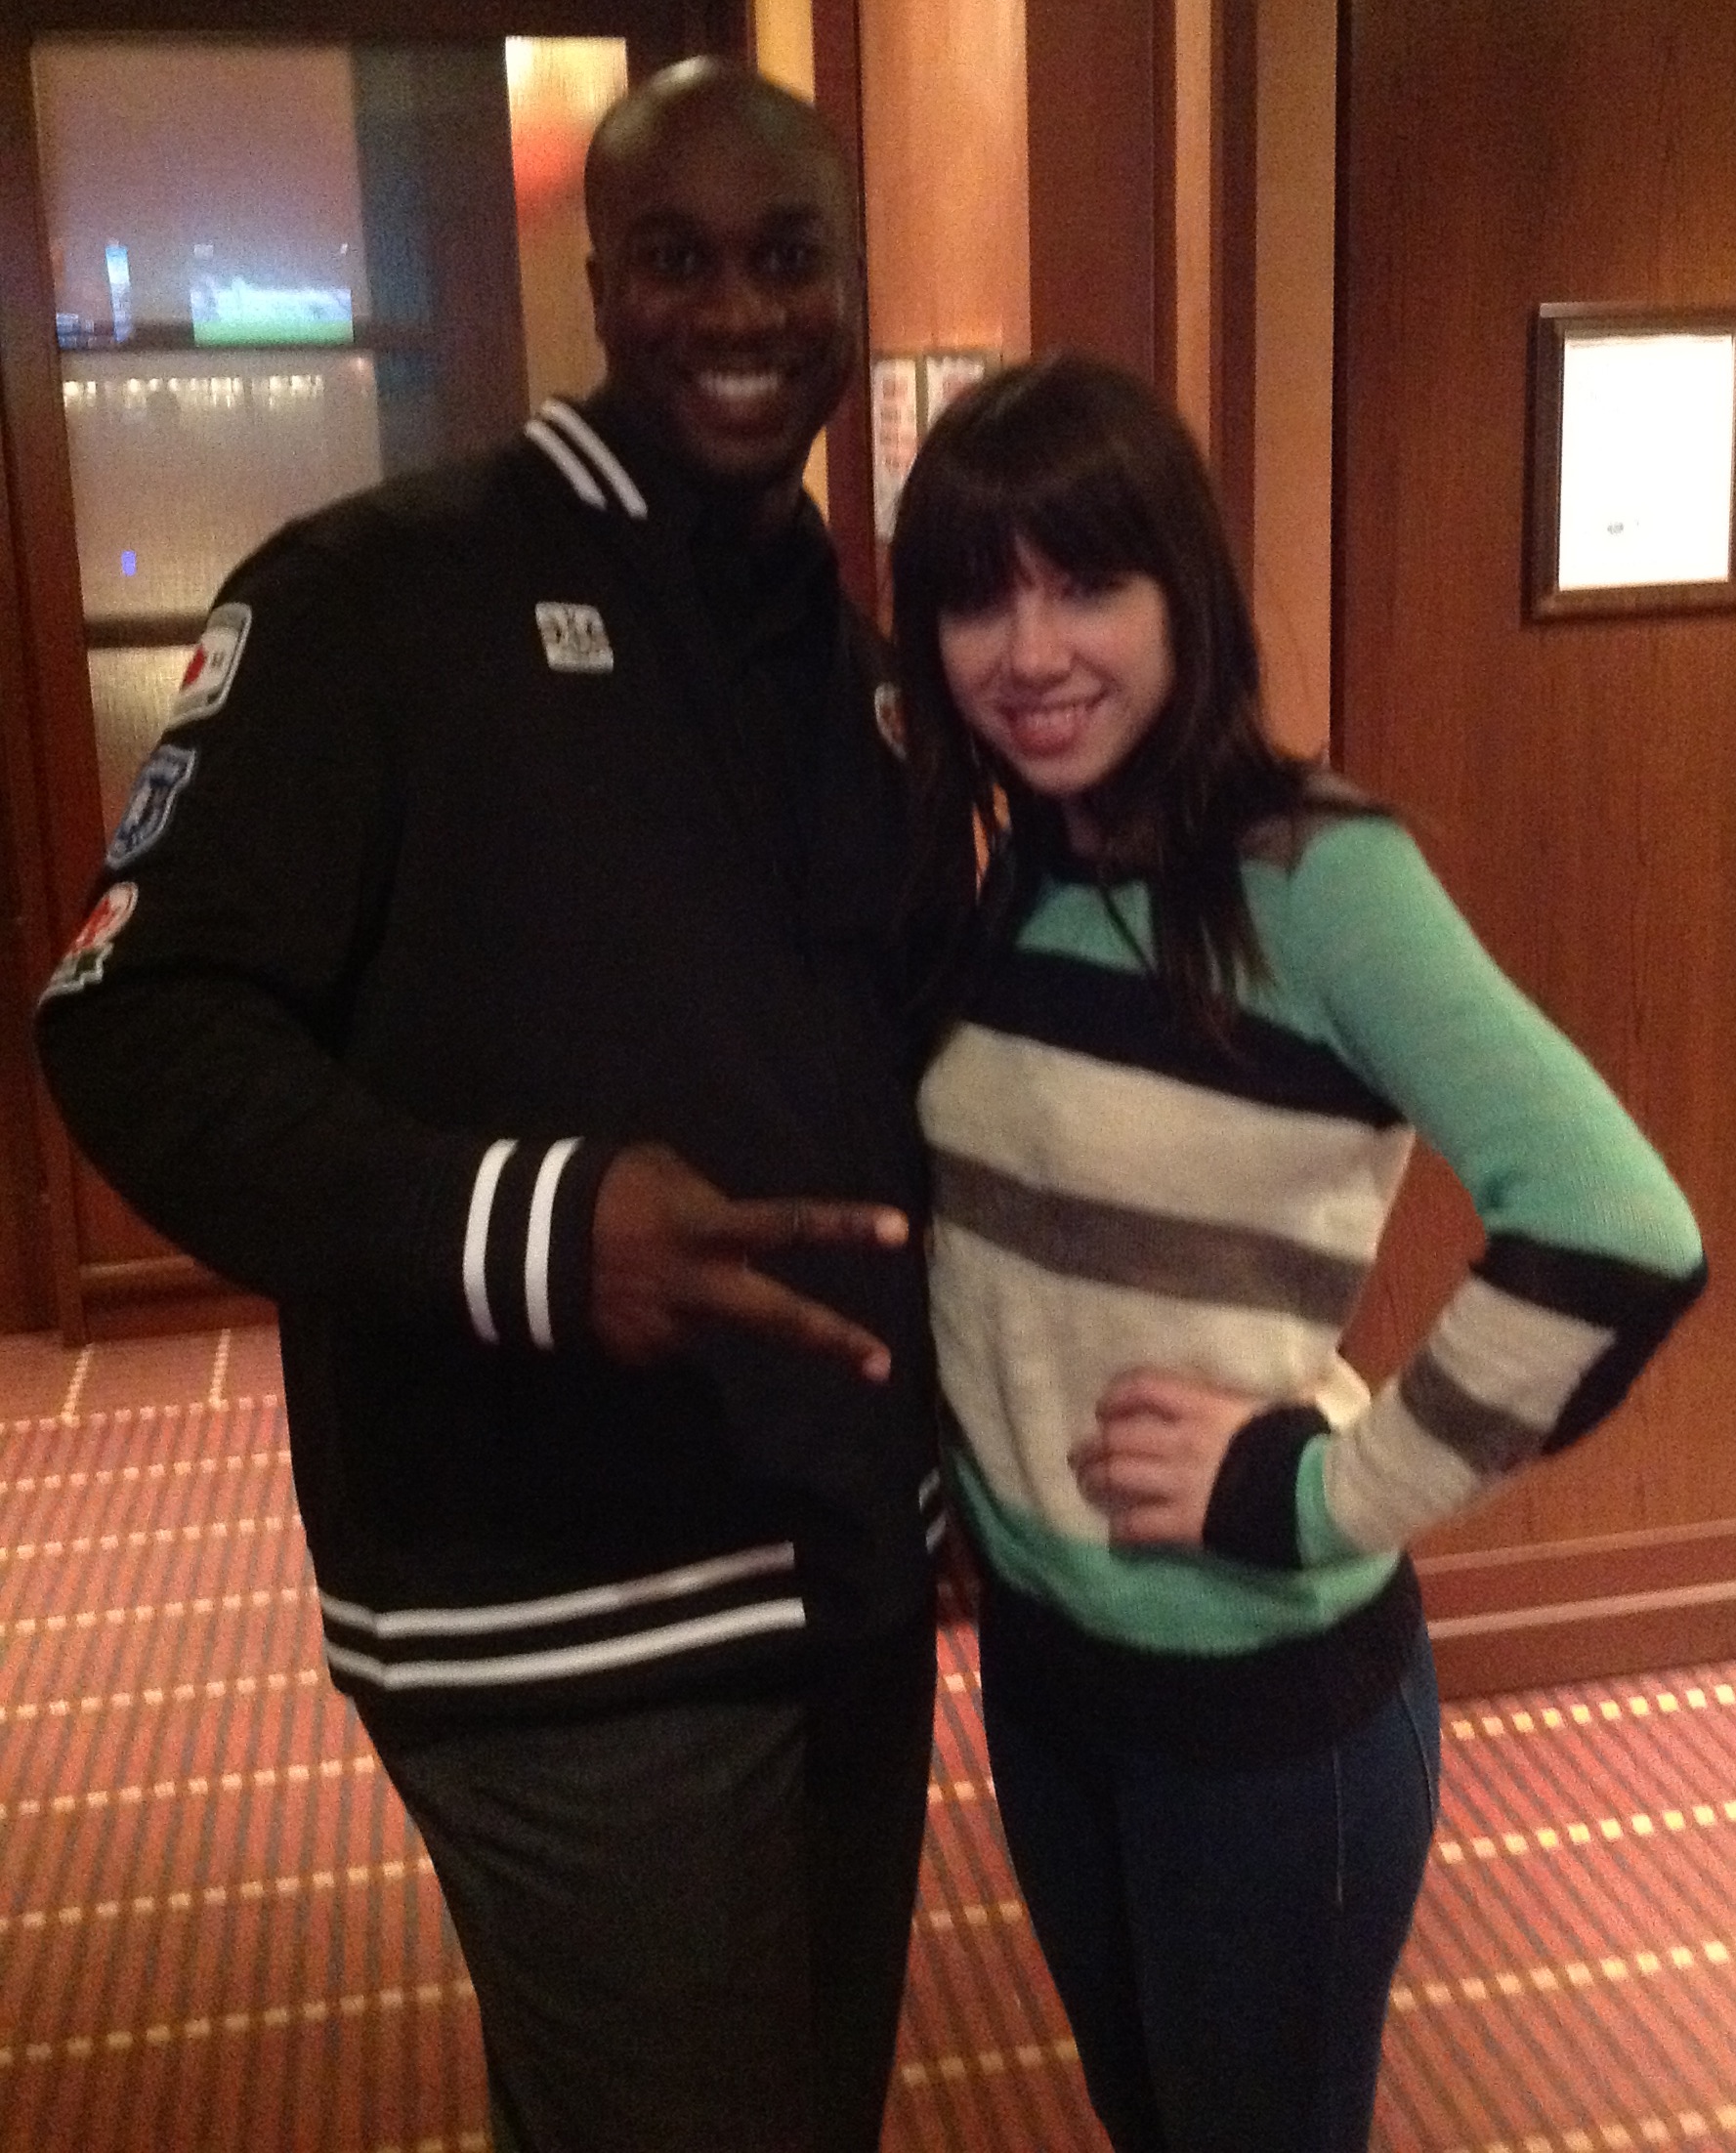 Actor Michael A. Amos with singer Carley Rae Jespen in Chicago, IL